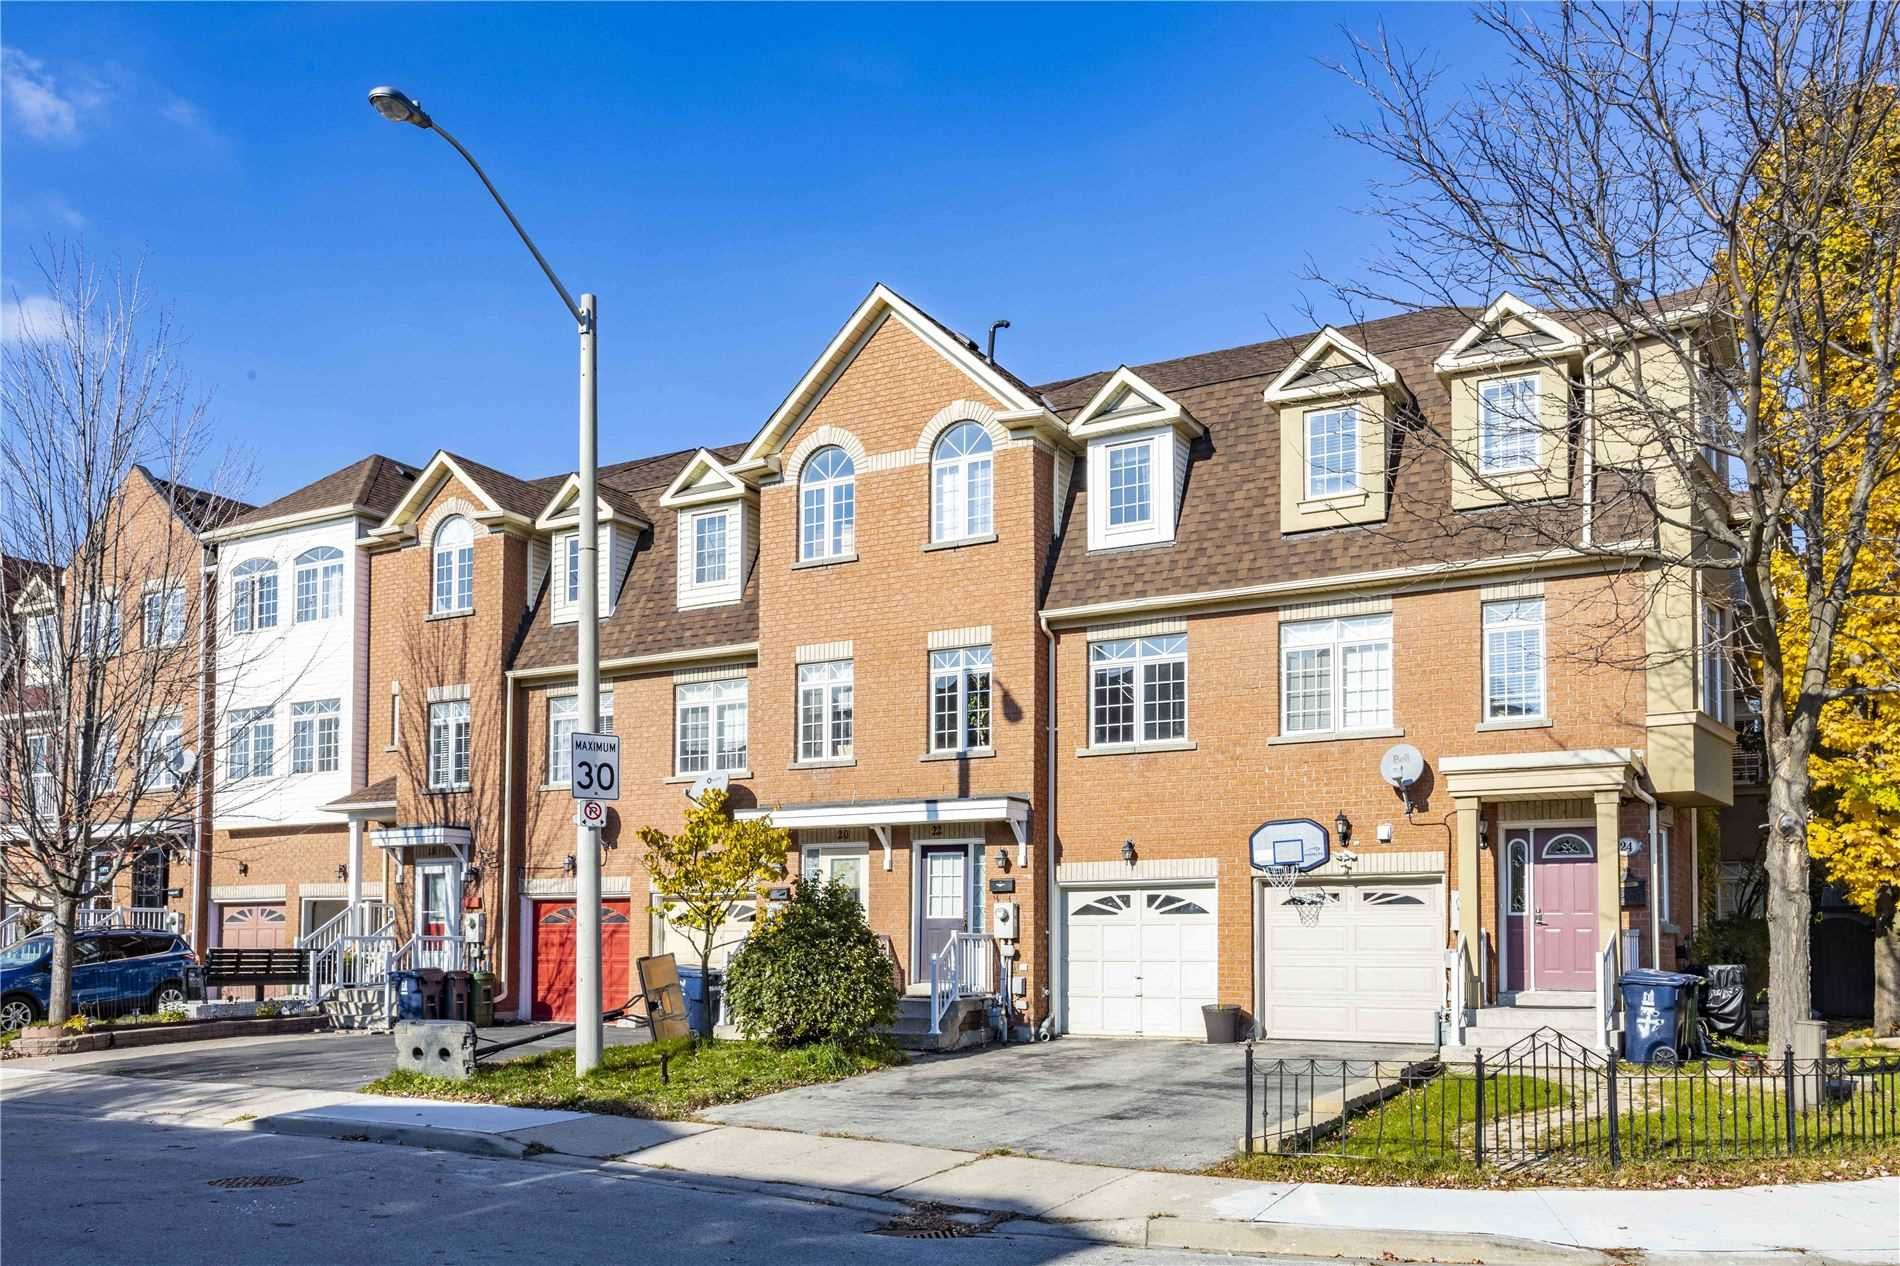 Main Photo: 22 Guillet Street in Toronto: O'Connor-Parkview House (3-Storey) for sale (Toronto E03)  : MLS®# E5425995